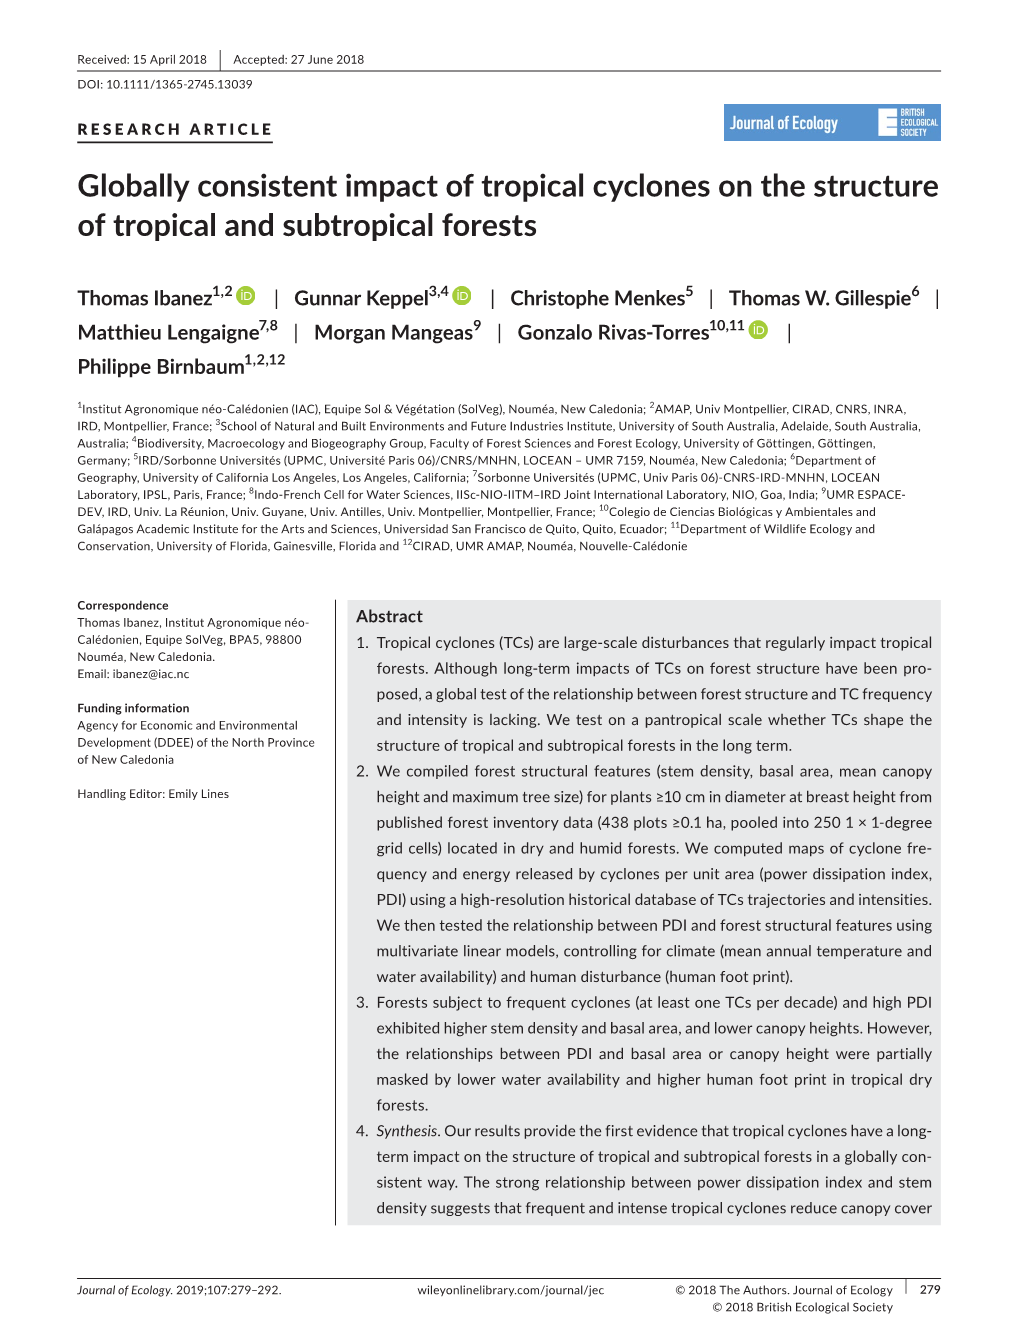 Globally Consistent Impact of Tropical Cyclones on the Structure of Tropical and Subtropical Forests